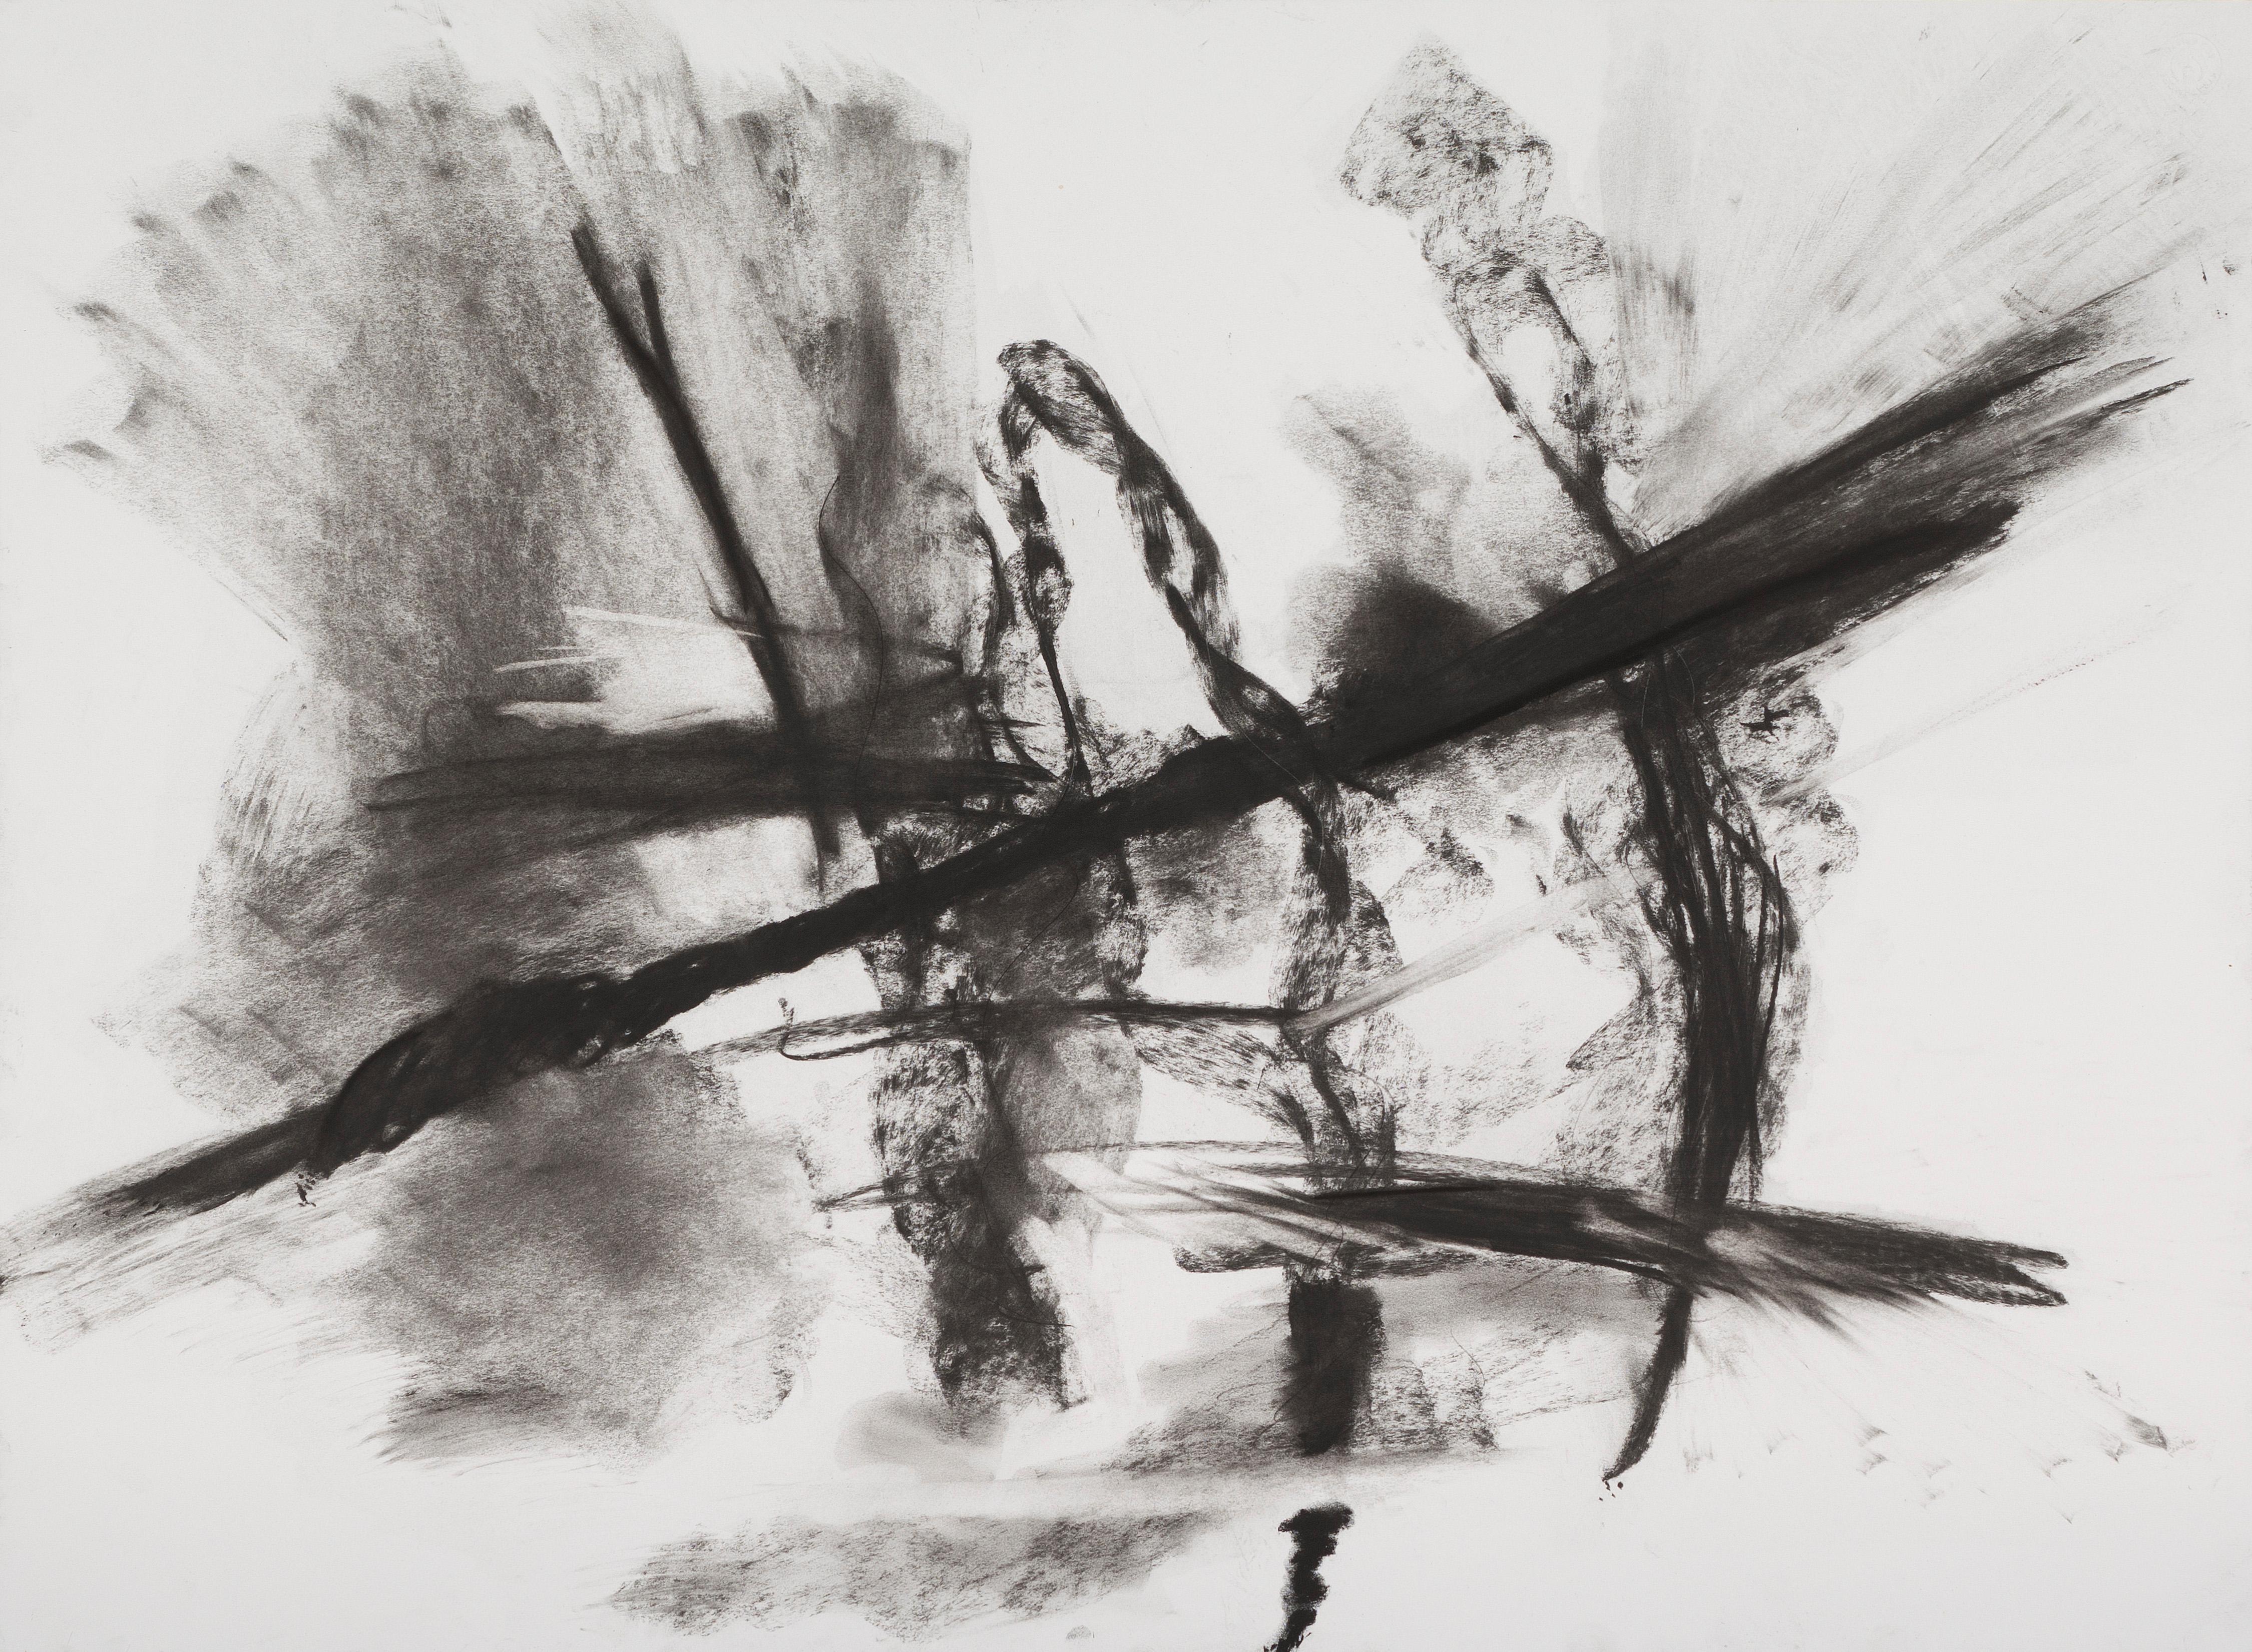 Peter Wise Abstract Drawing - PETER WISE "Untitled" contemporary charcoal black & white abstract drawing